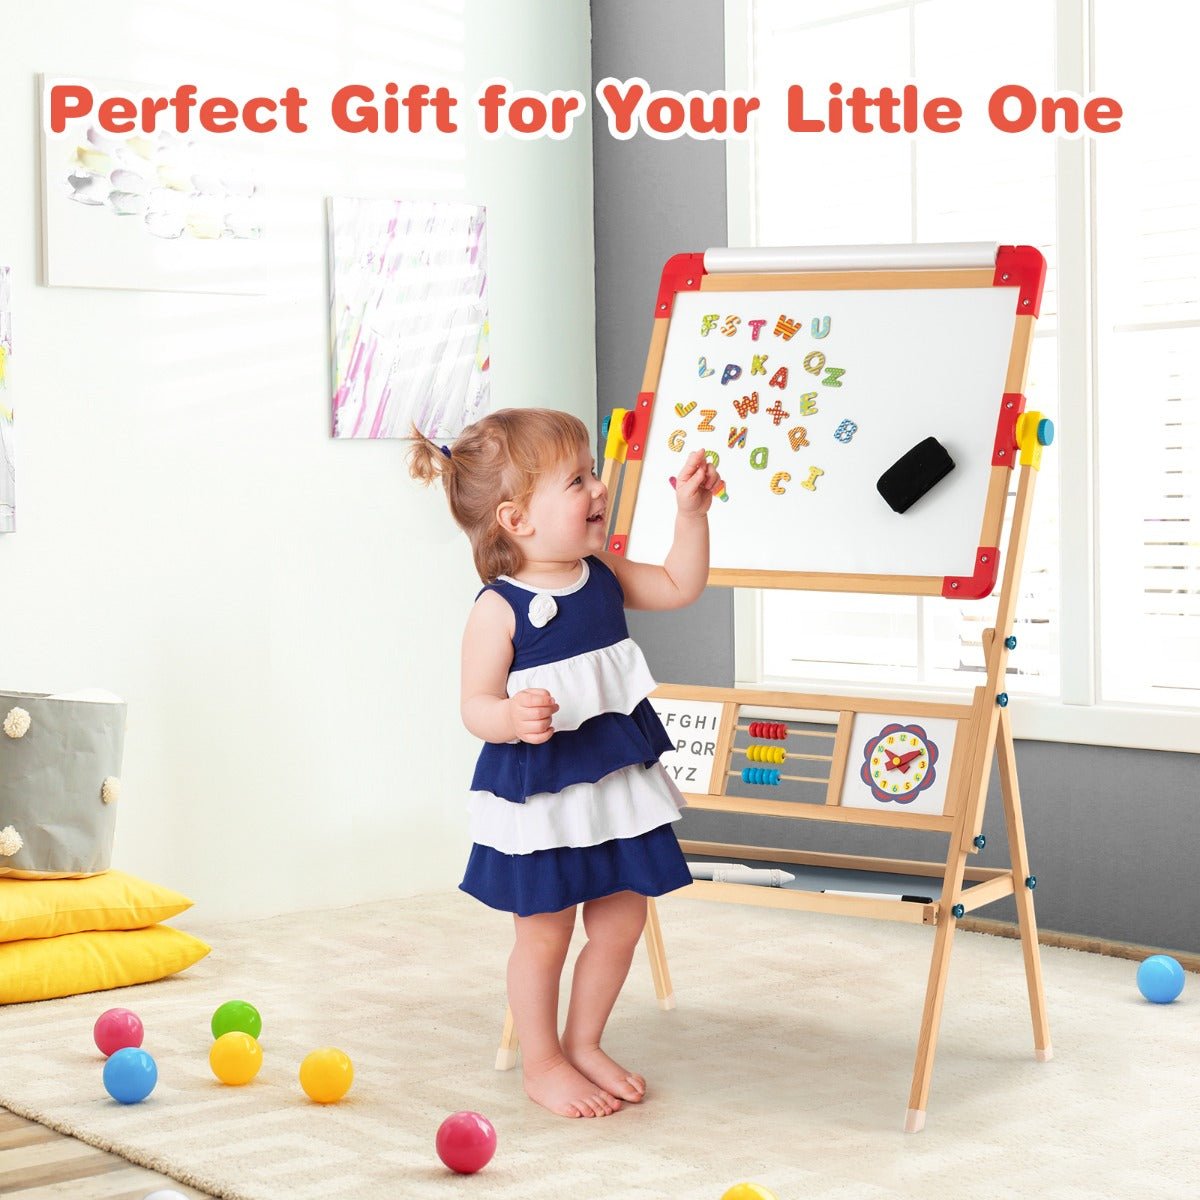 3-in-1 Wooden Art Easel - Quality Artistic Expression for Kids